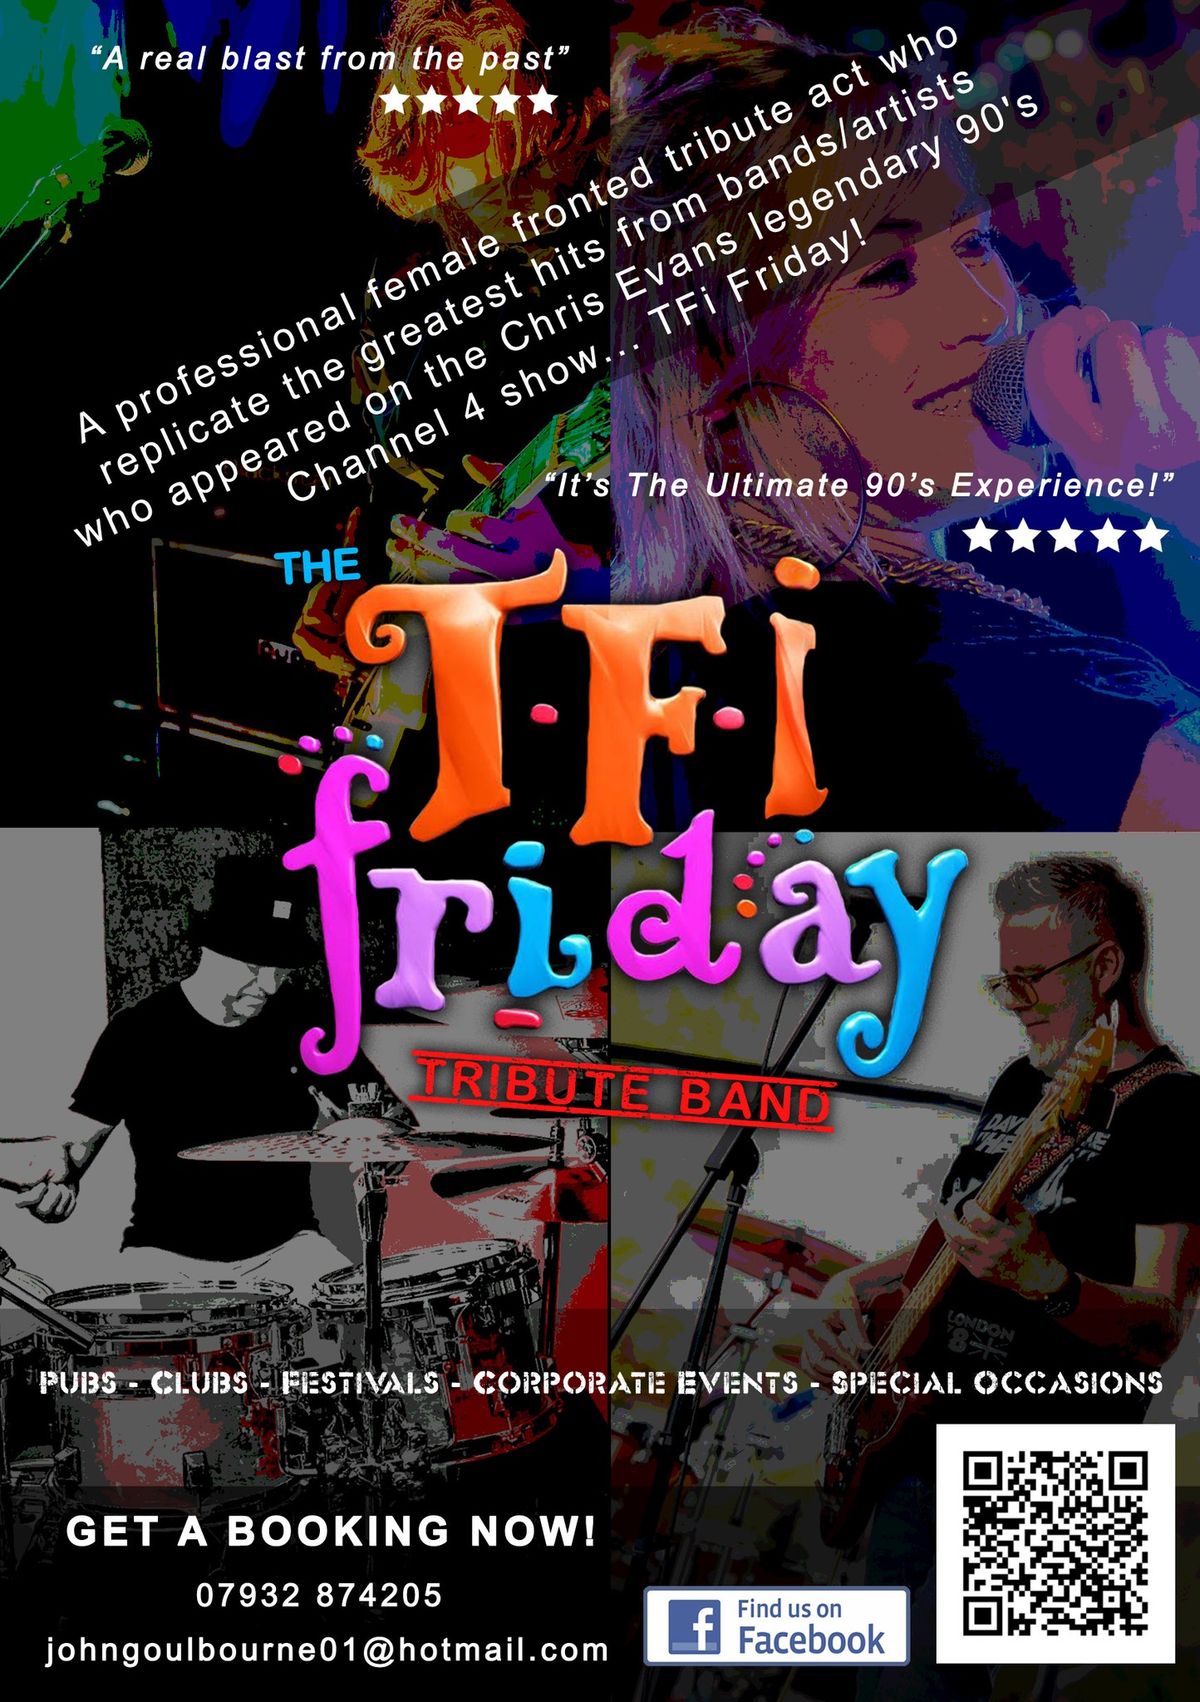 The TFl Friday Tribute Band at Kinson Conservative Club